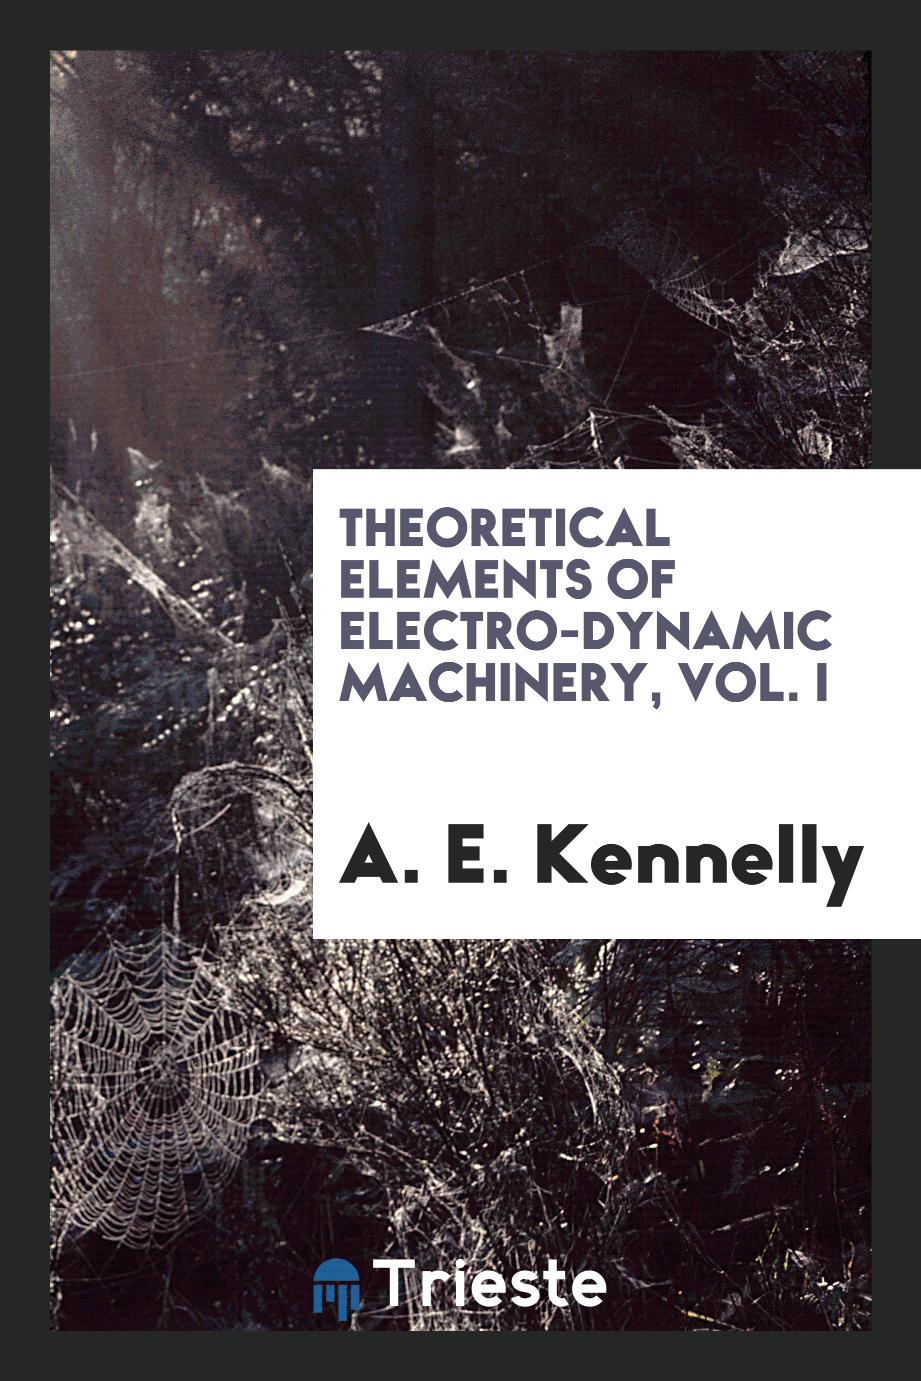 Theoretical Elements of Electro-Dynamic Machinery, Vol. I